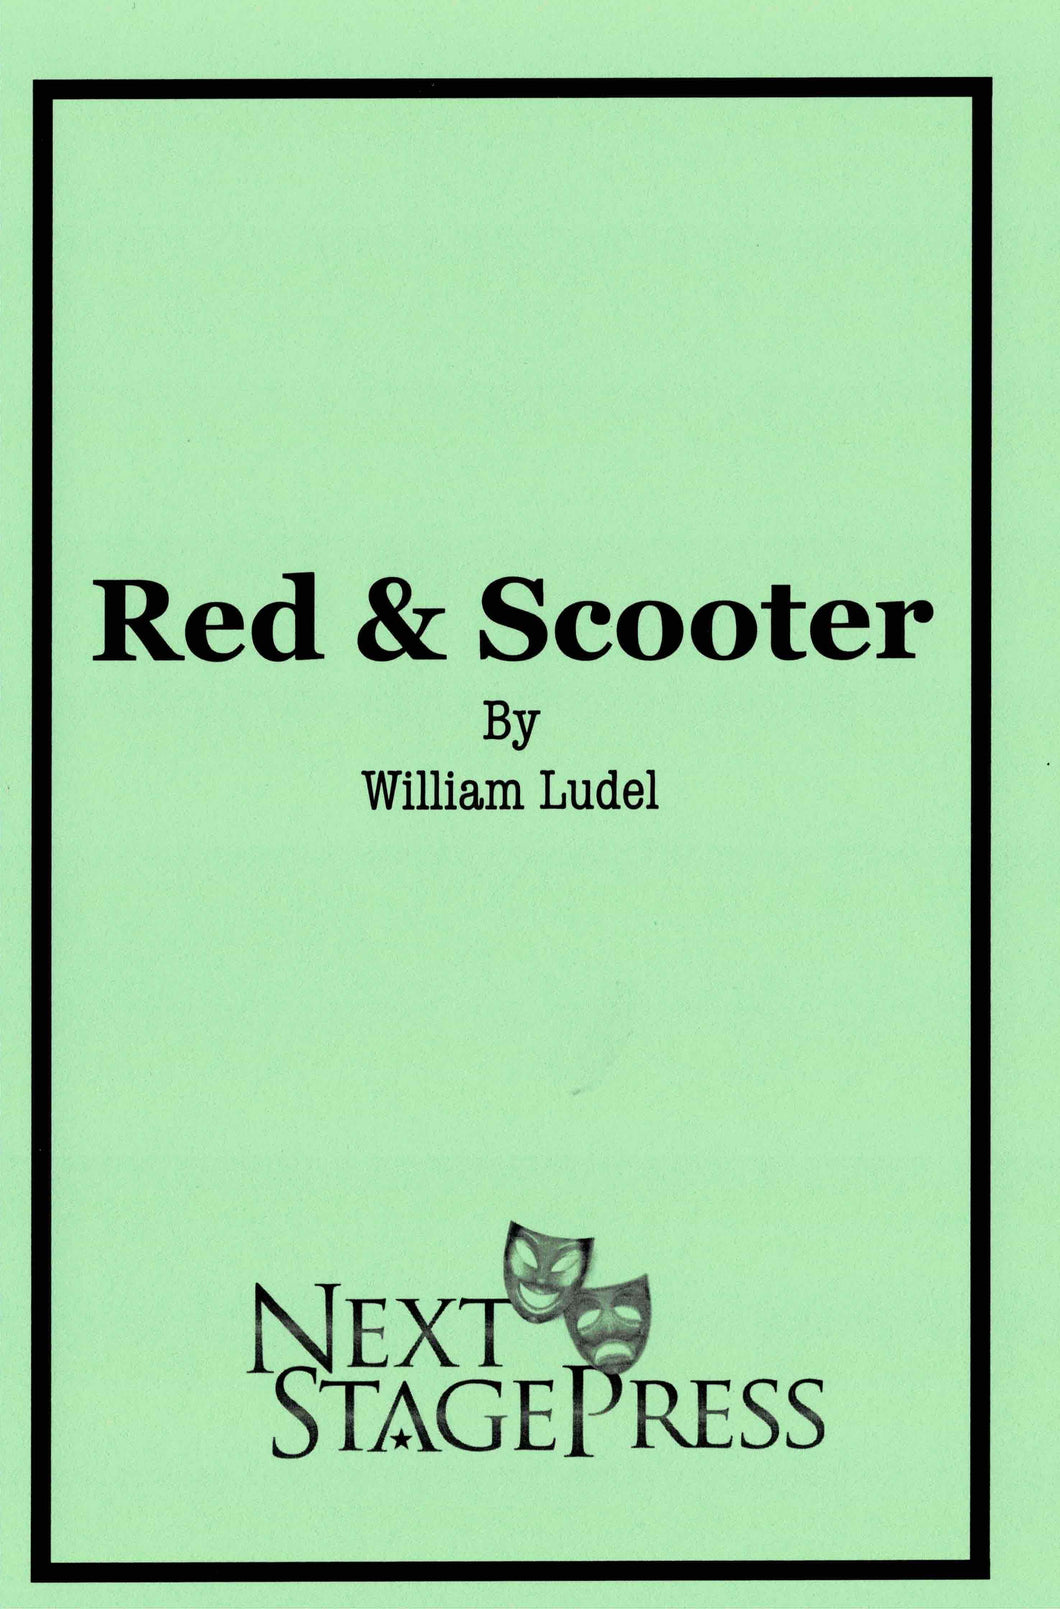 Red & Scooter by William Ludel - Digital Version